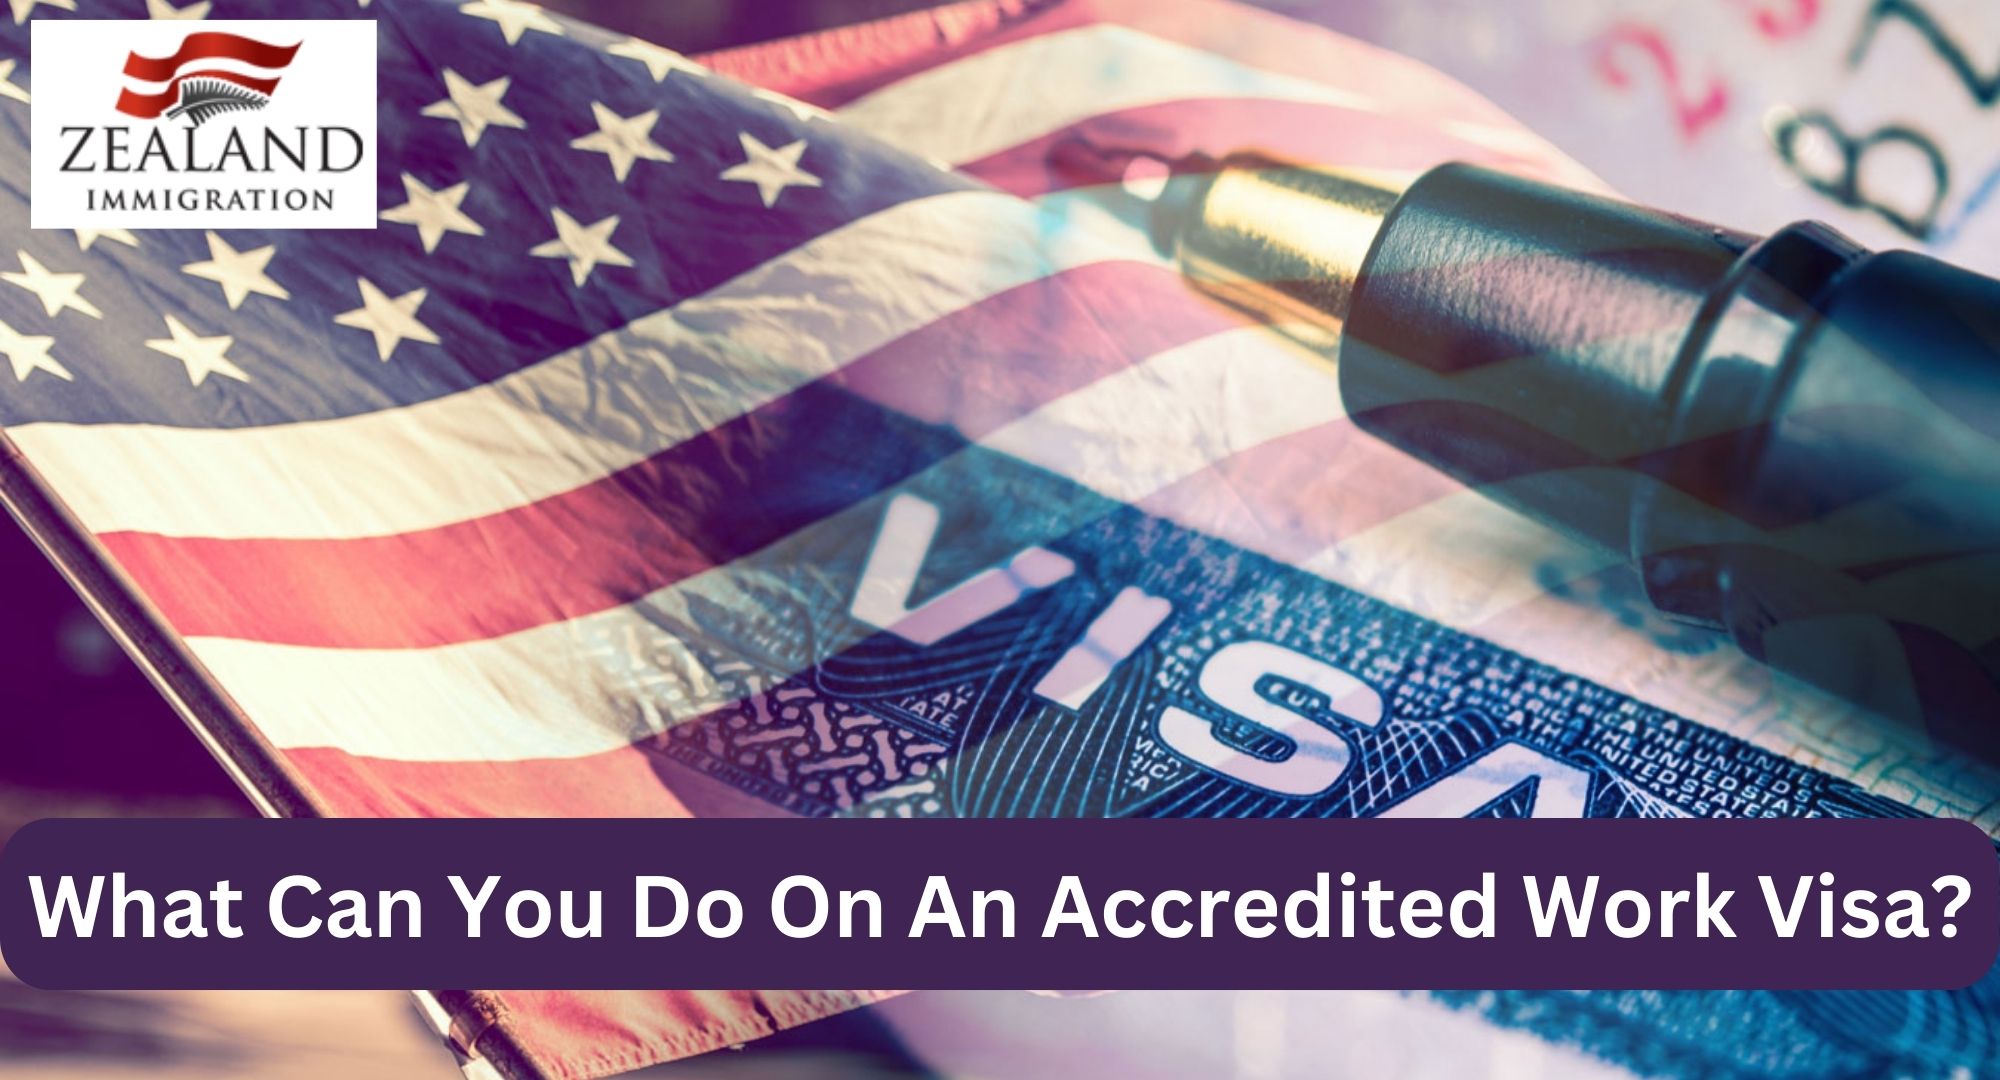 What Can You Do On An Accredited Work Visa?